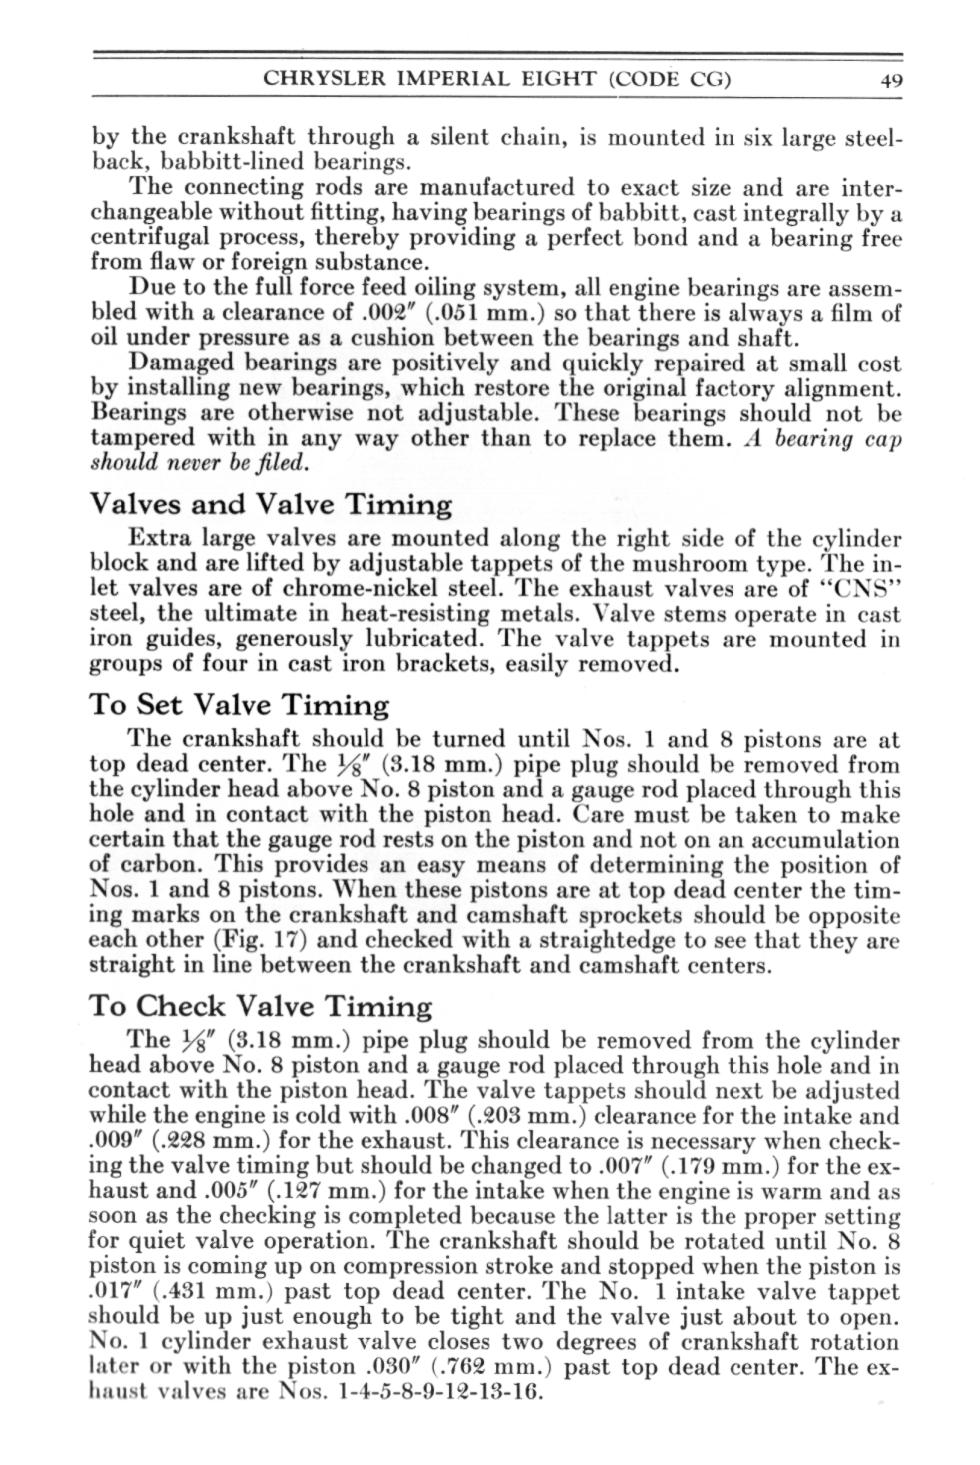 1931 Chrysler Imperial Owners Manual Page 75